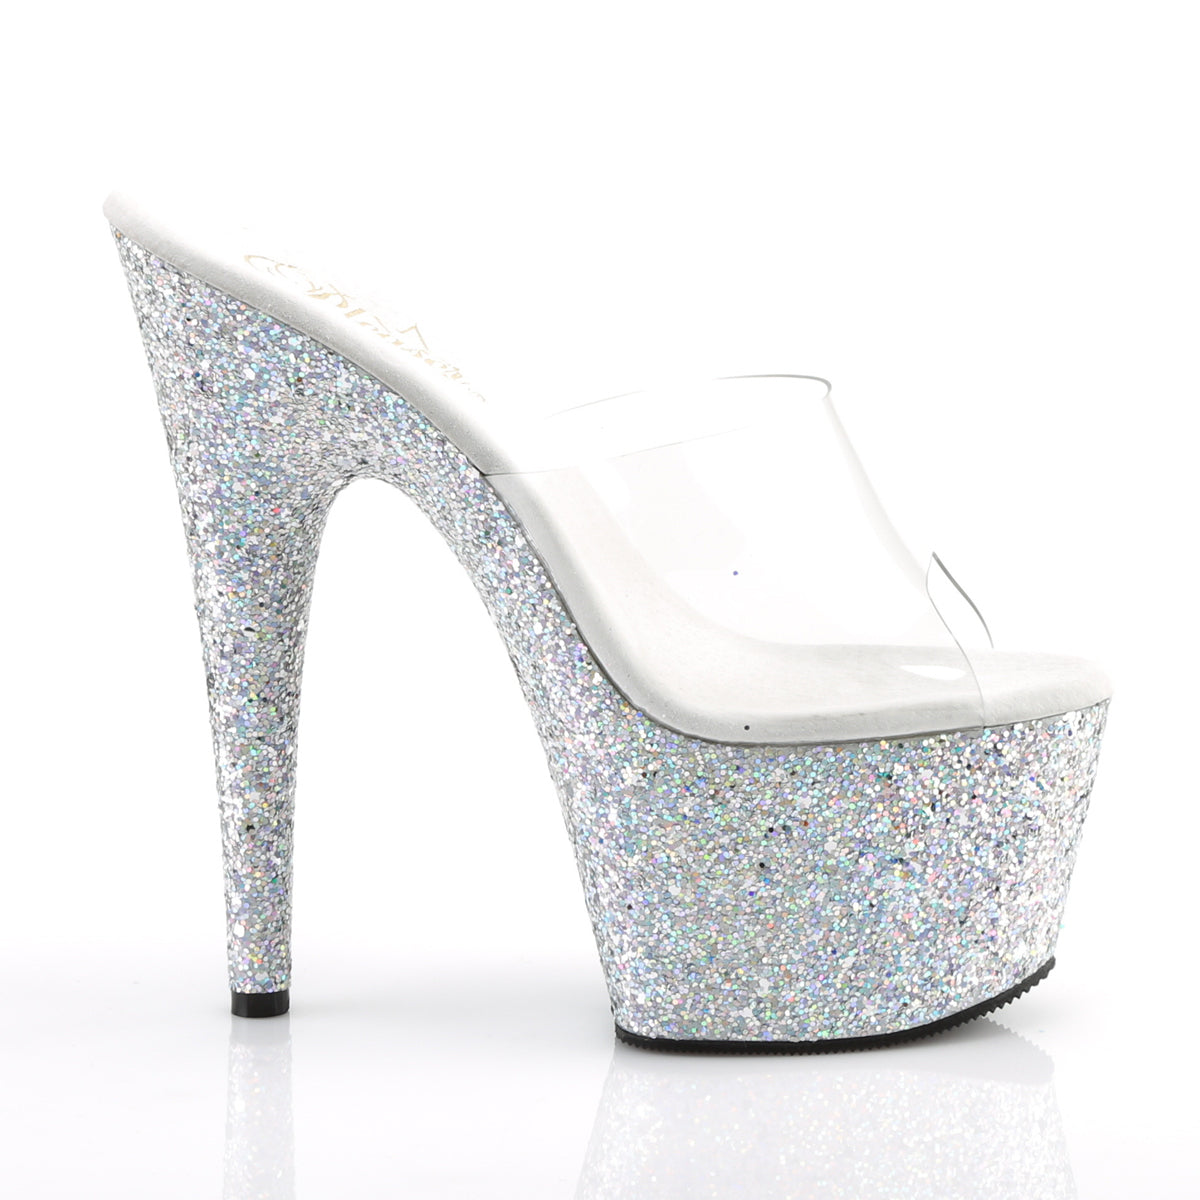 ADORE-701LG 7" Heel Clear Silver Glitter Platforms Sexy Shoe-Pleaser- Sexy Shoes Fetish Heels